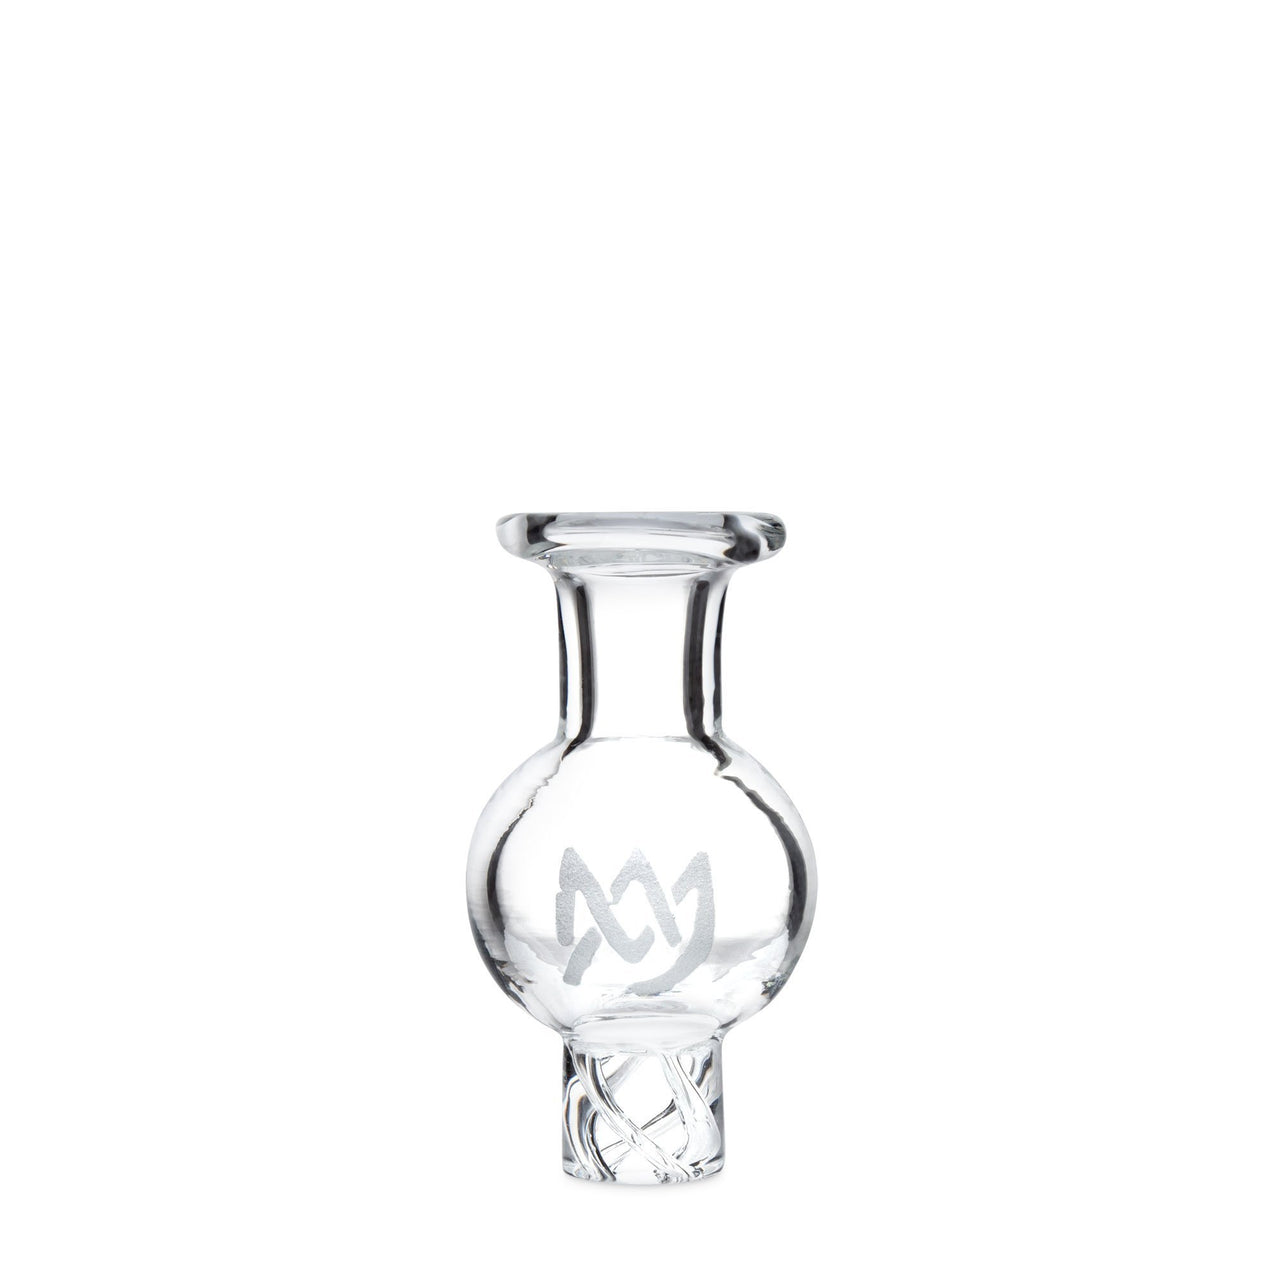 MJ Arsenal Spinner Carb Cap - Dab Banger Accessories